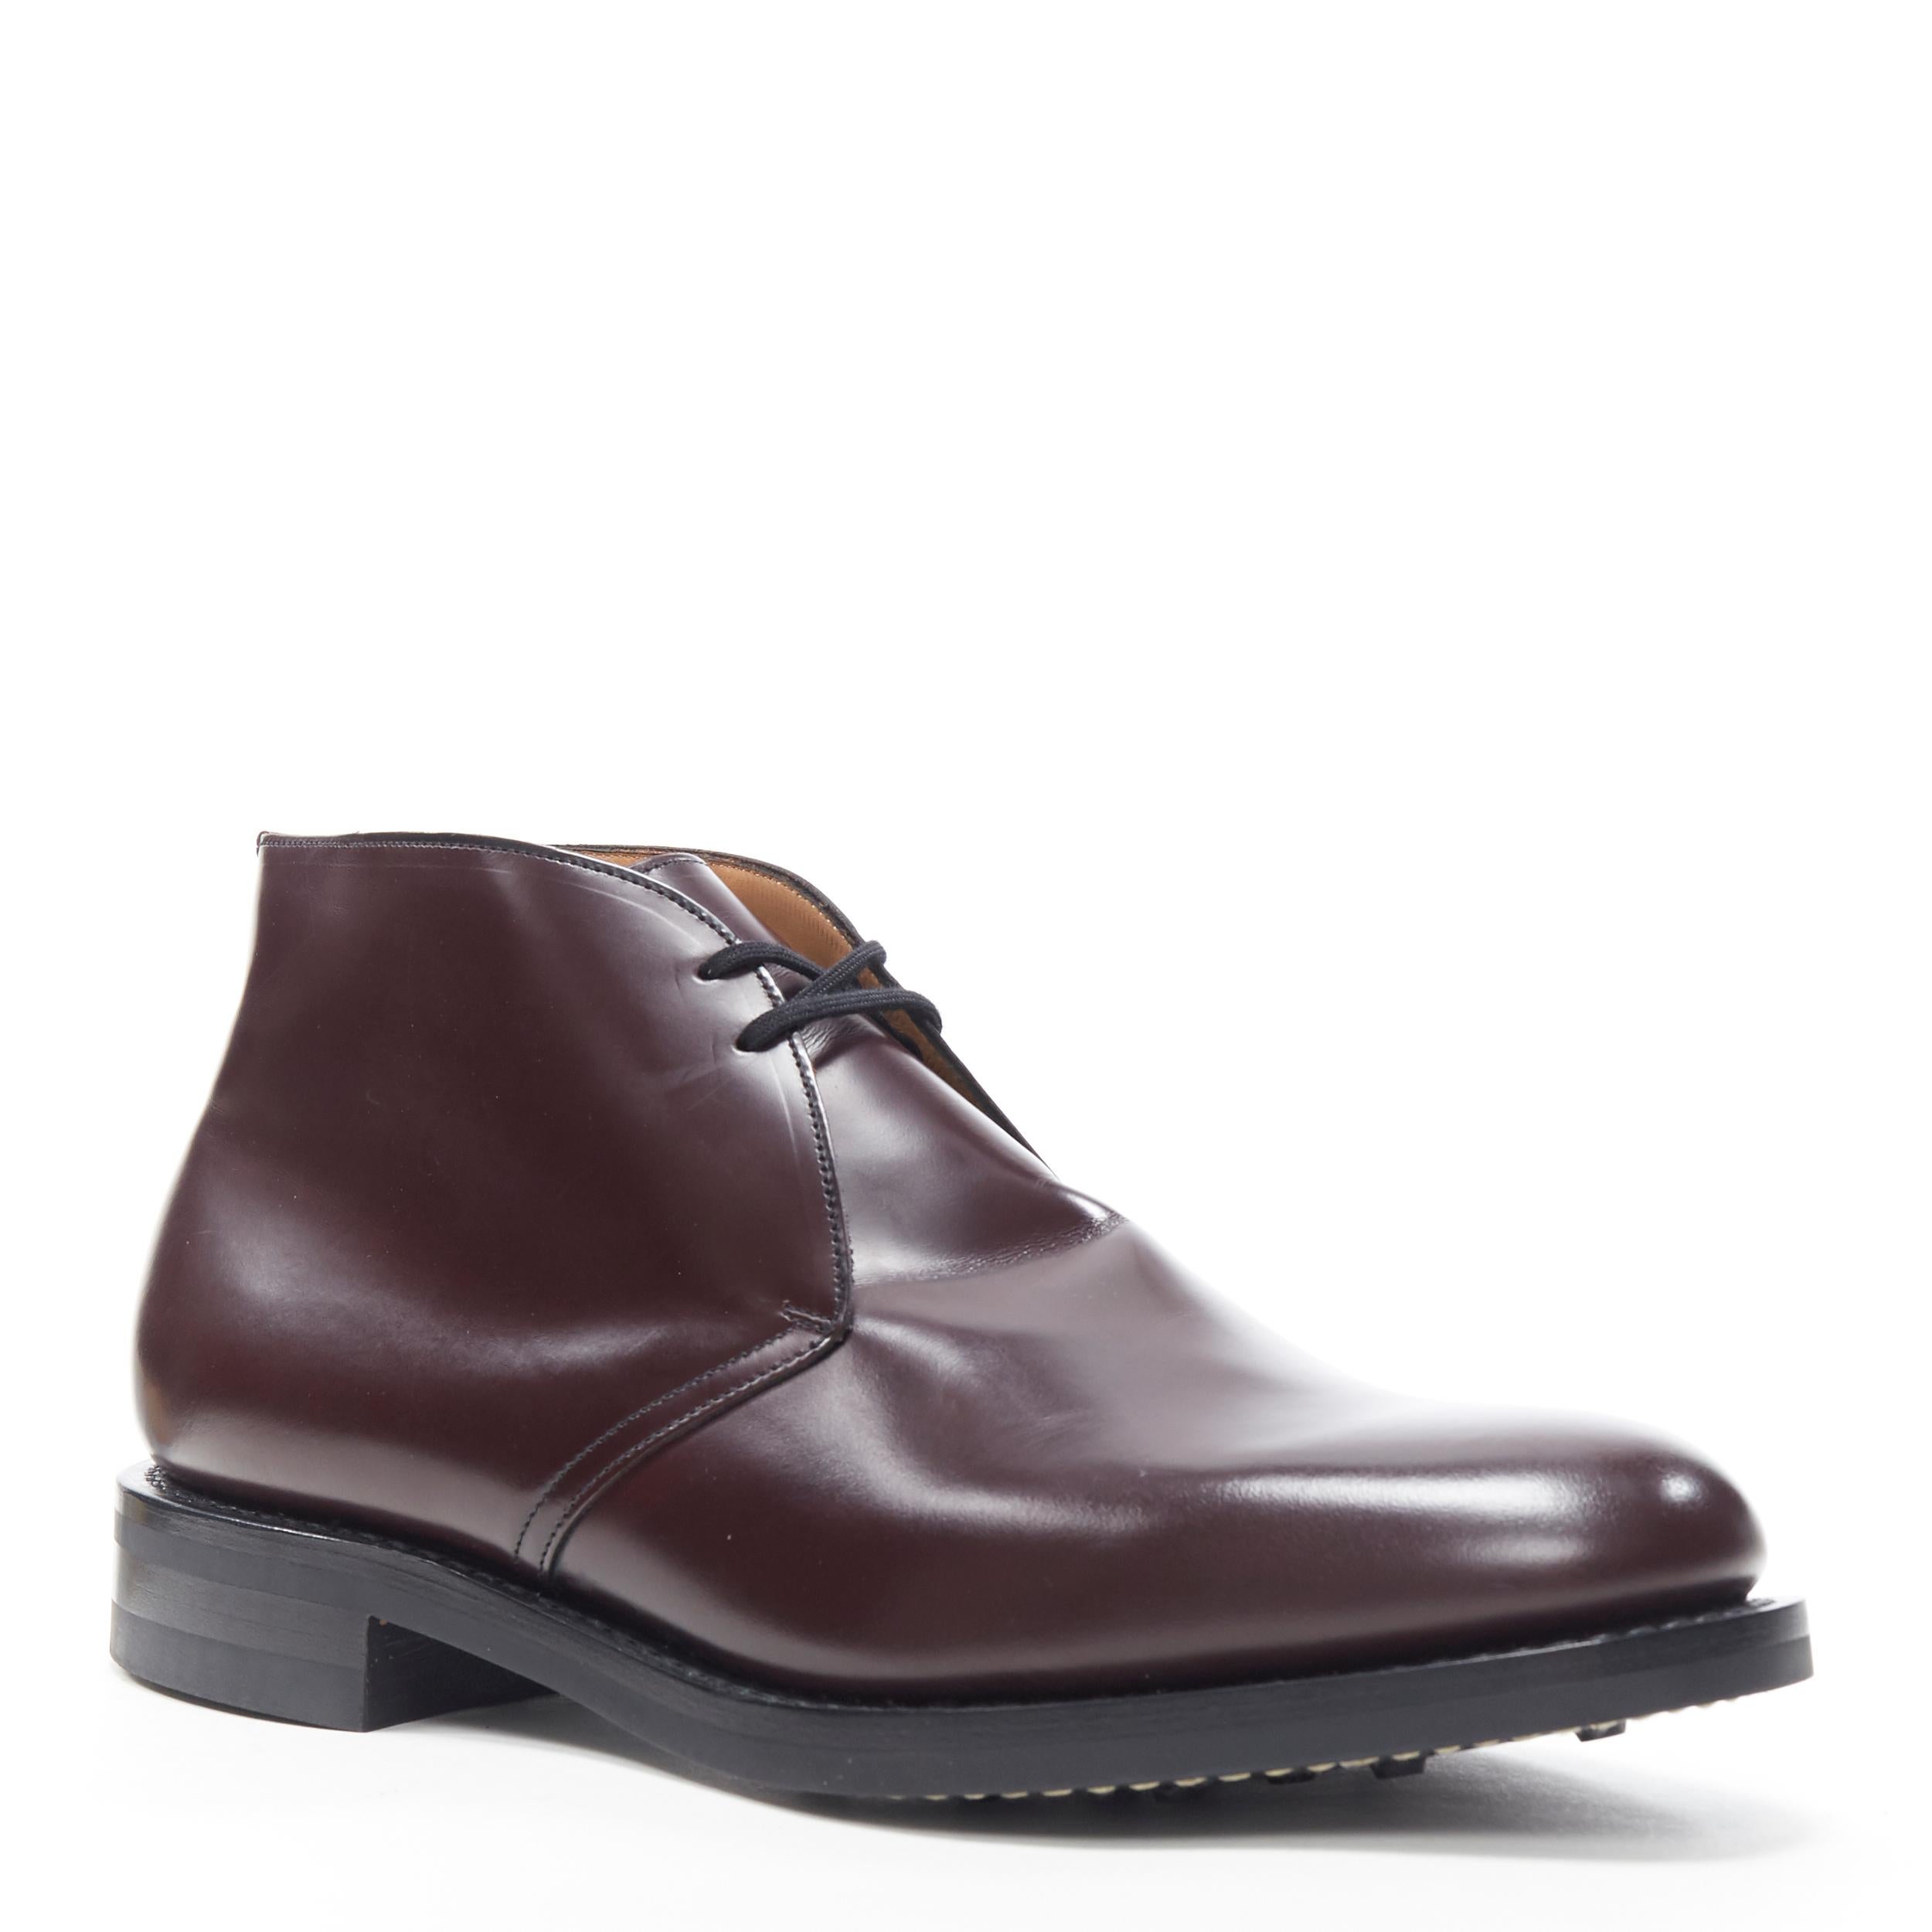 new CHURCHS Ryder 3 Burgundy Bright Calf polished leather chukka boots UK11 EU45
Brand: Churchs
Model Name / Style: Ryder
Material: Leather
Color: Burgundy
Pattern: Solid
Closure: Lace up
Extra Detail: Polished dark burgundy 'Bright Calf' leather